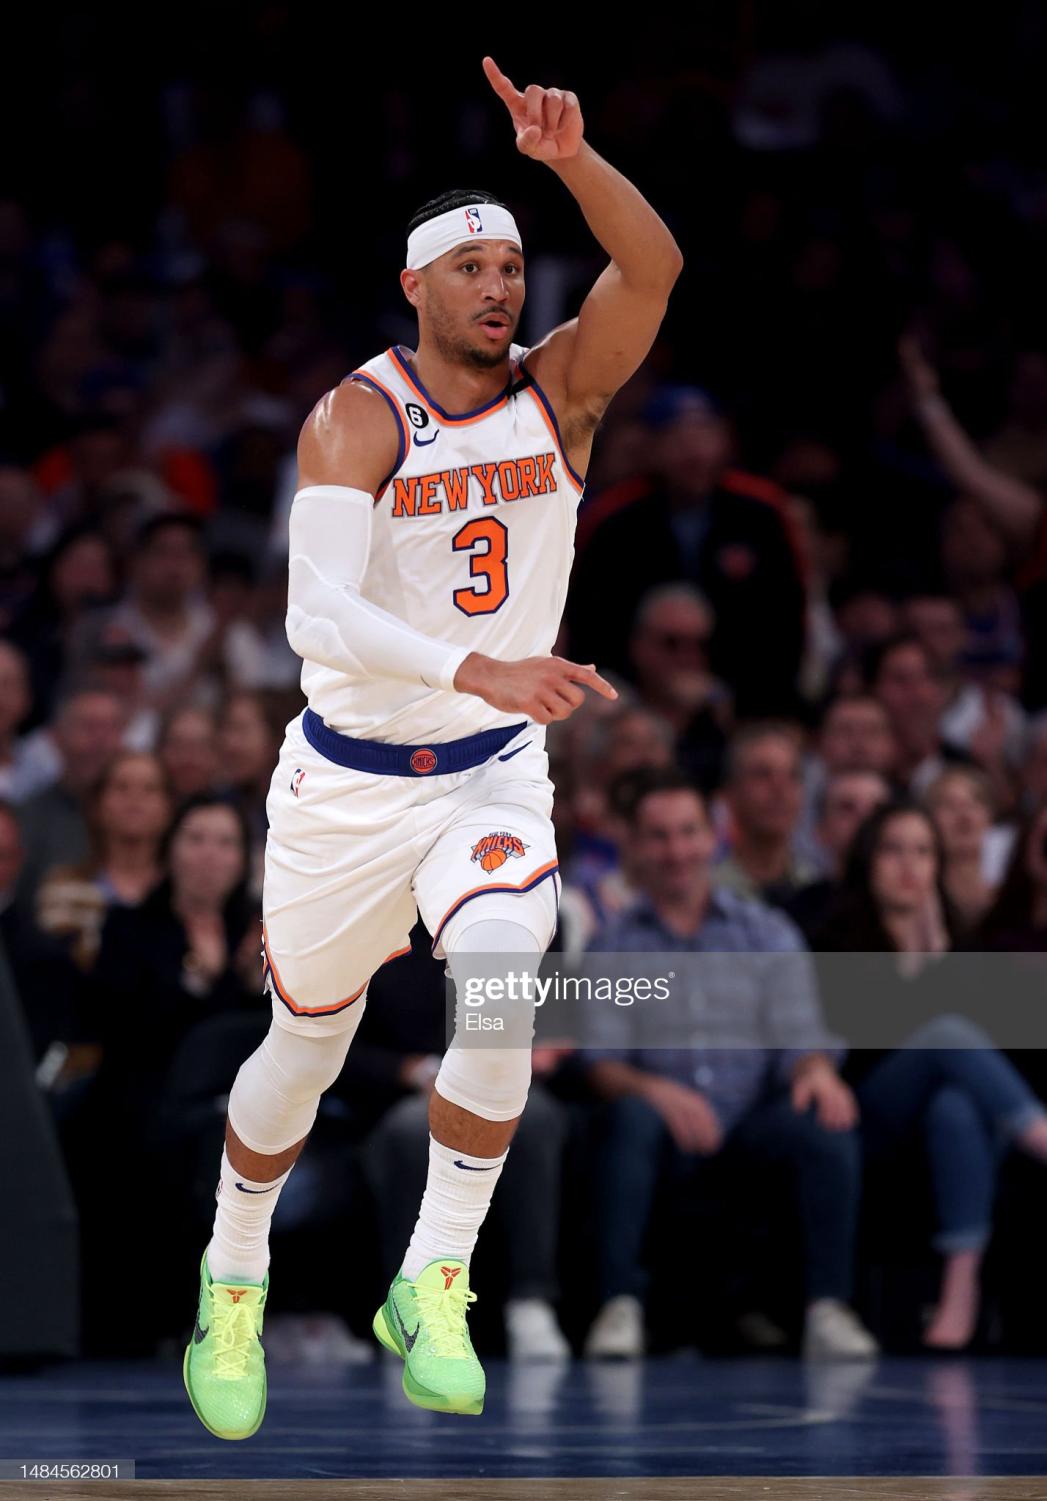 Josh Hart ready to power up his game as Knicks' backup four